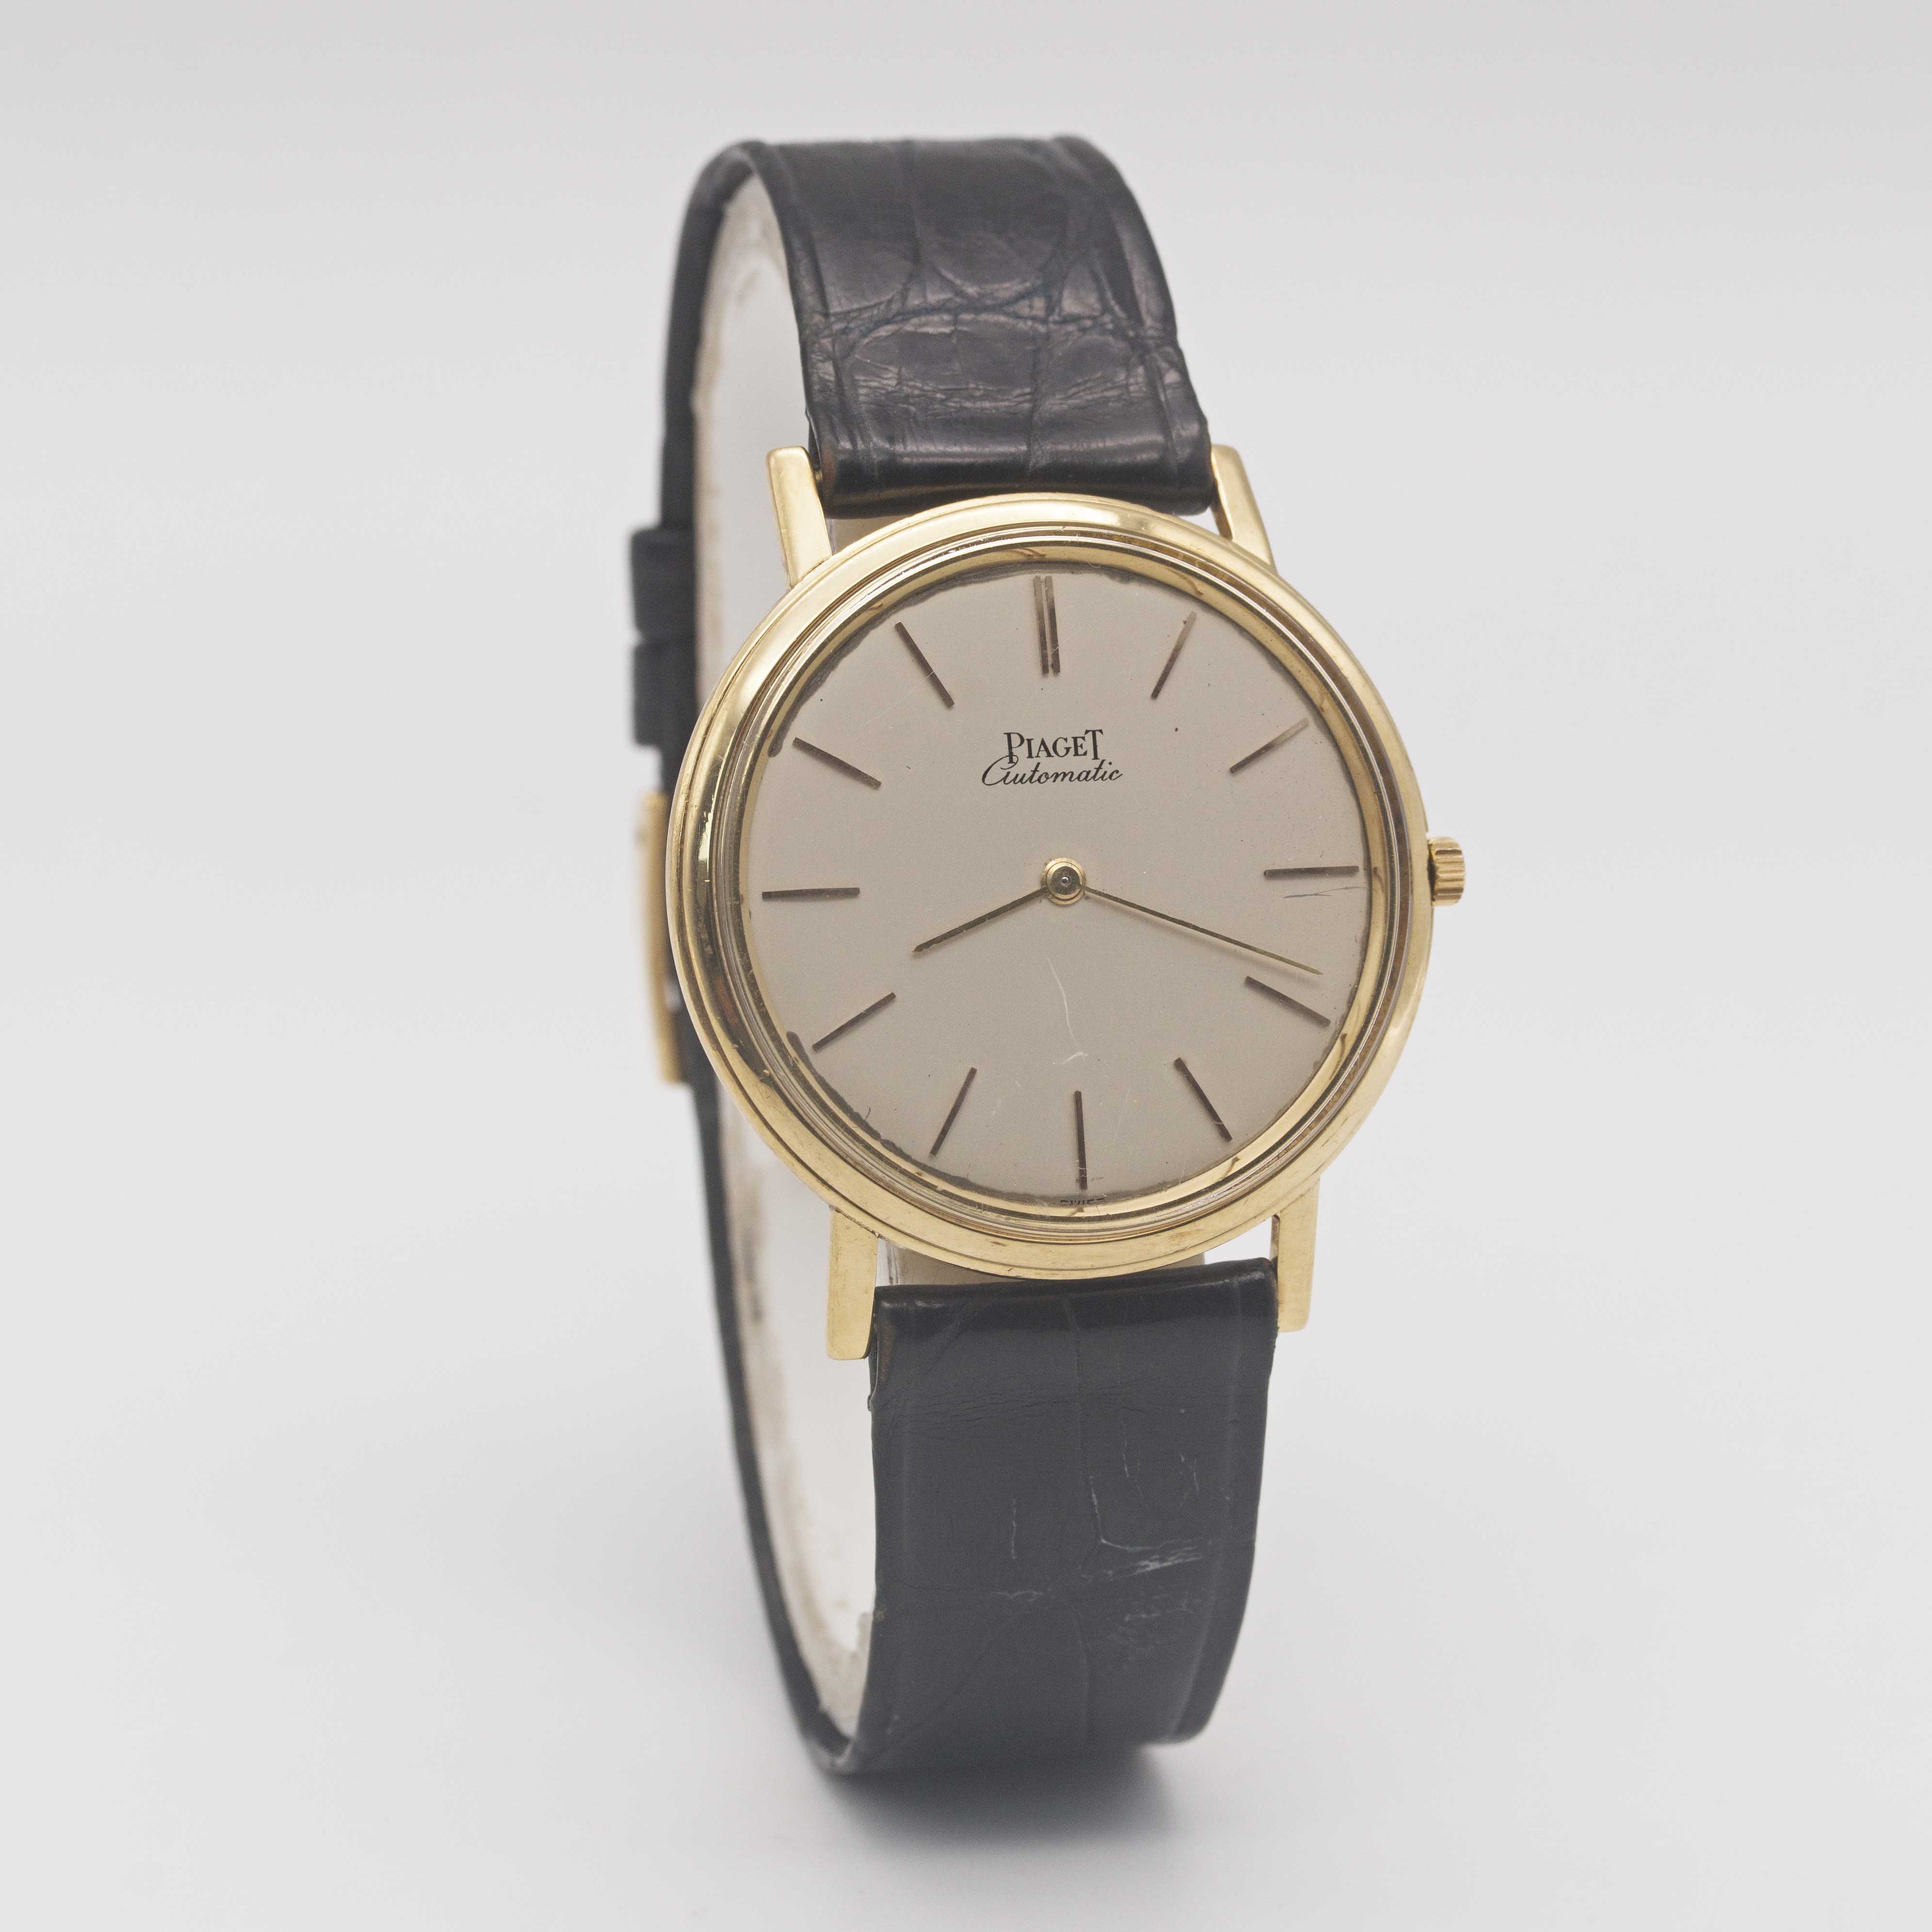 A GENTLEMAN'S 18K SOLID YELLOW GOLD PIAGET "ULTRA THIN" AUTOMATIC WRIST WATCH CIRCA 1970s, REF. - Image 5 of 8